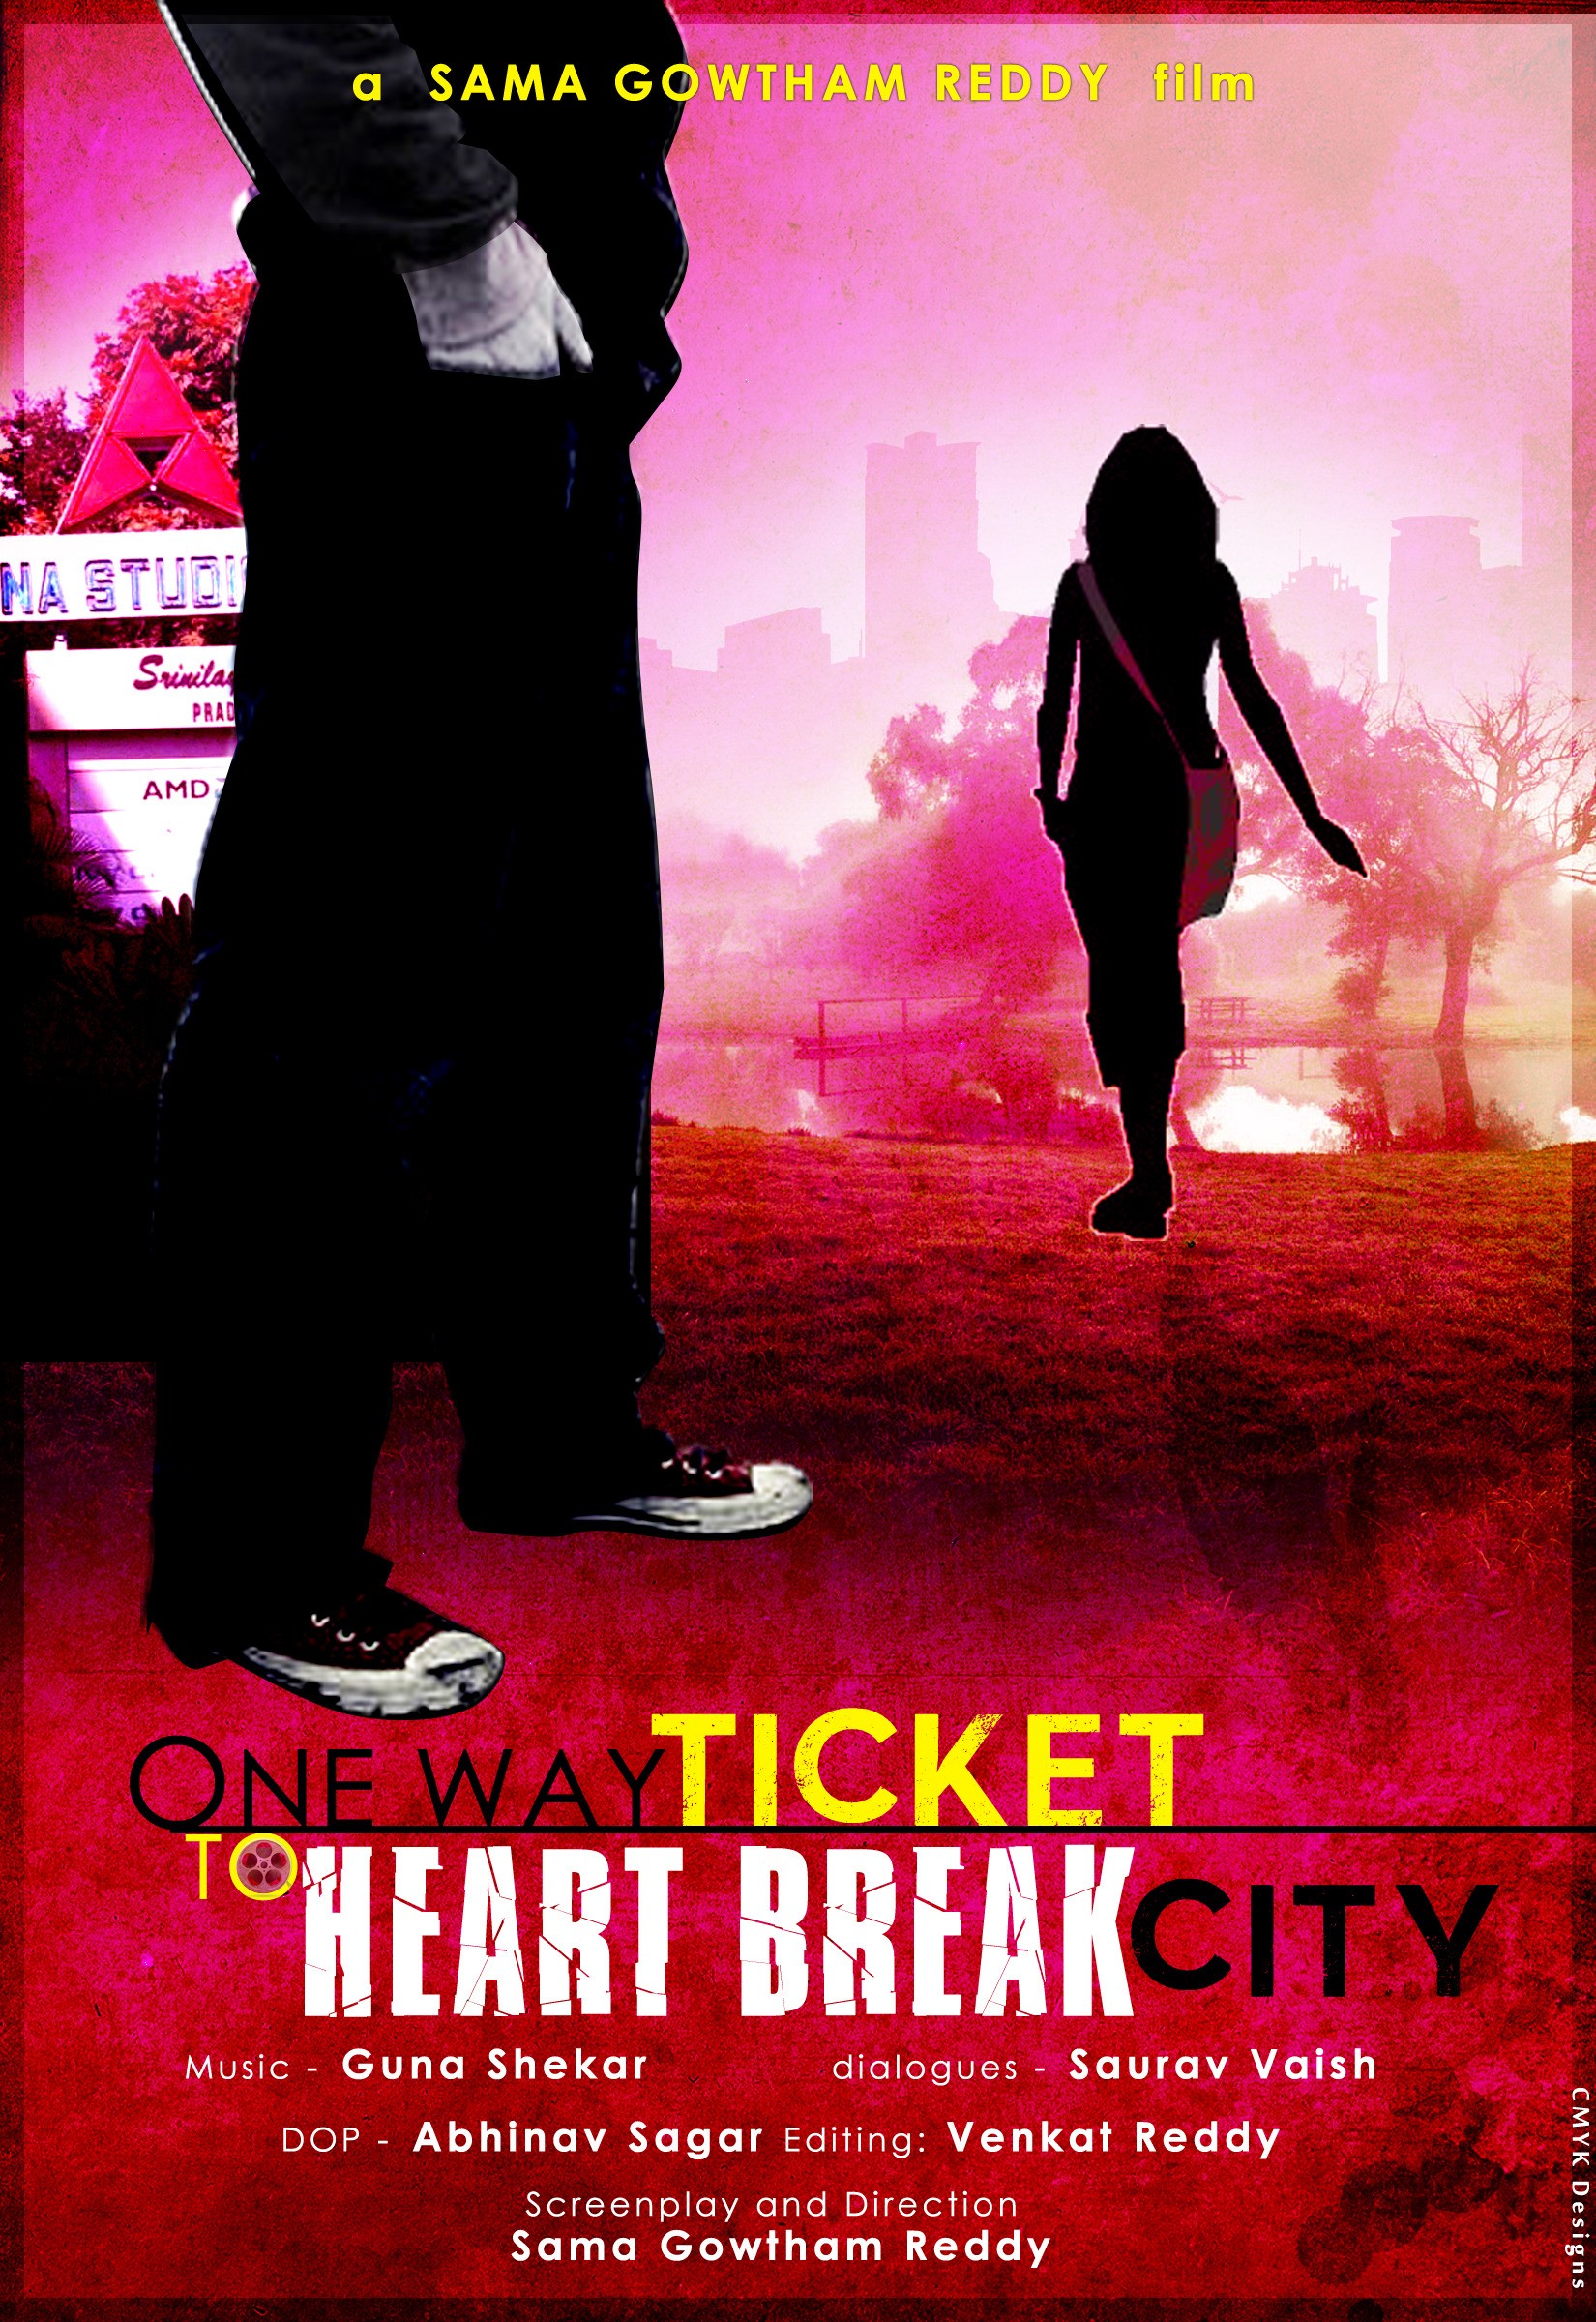 Mega Sized Movie Poster Image for One Way Ticket to Heart Break City